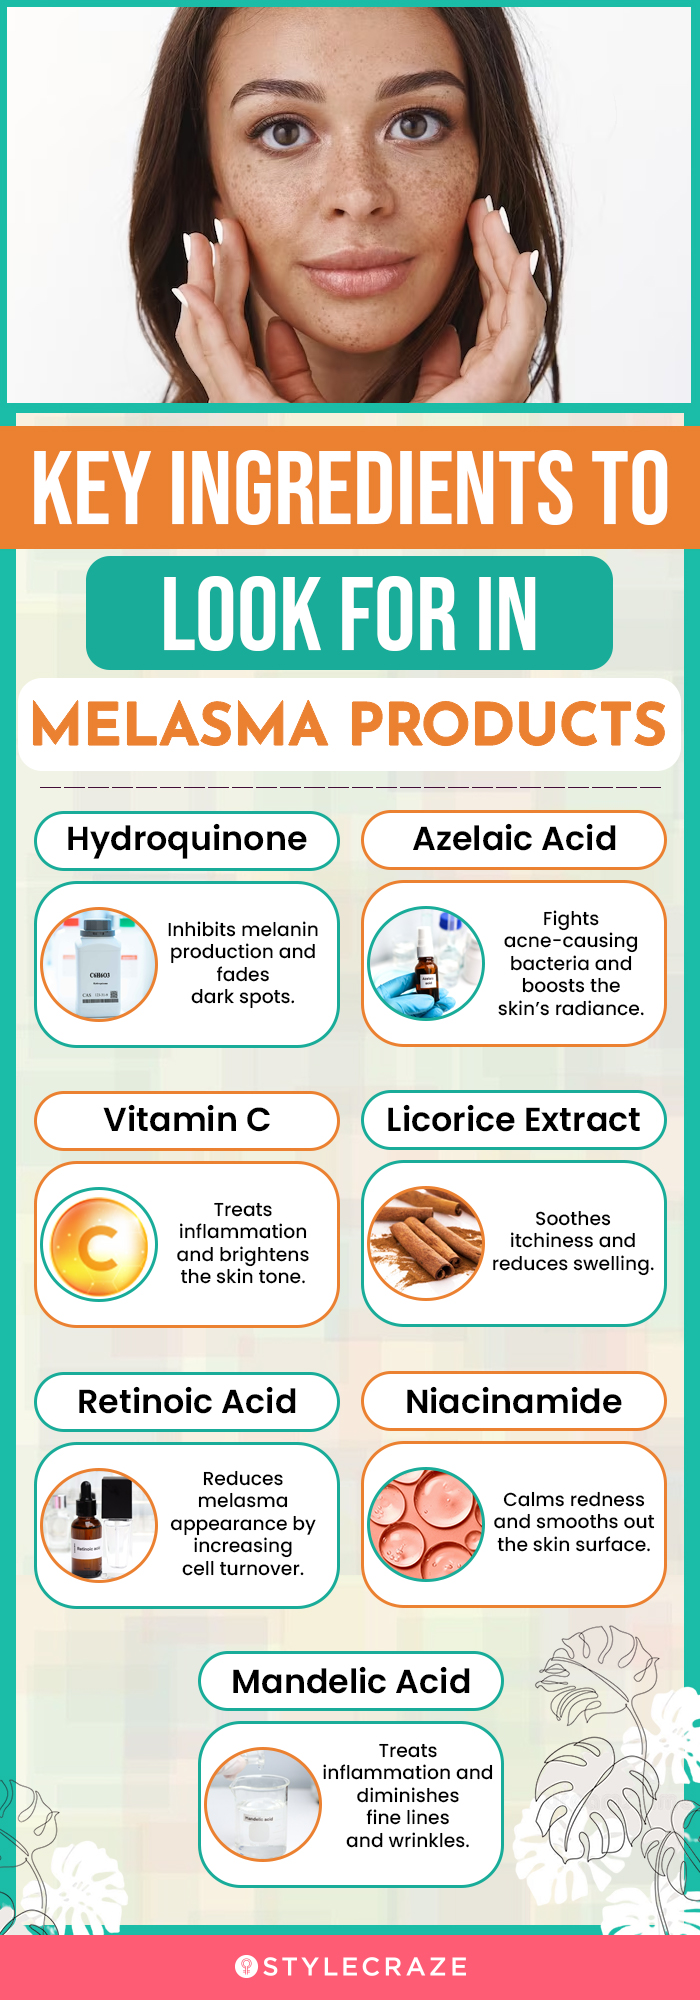 Key Ingredients To Look For In Melasma Products (infographic)